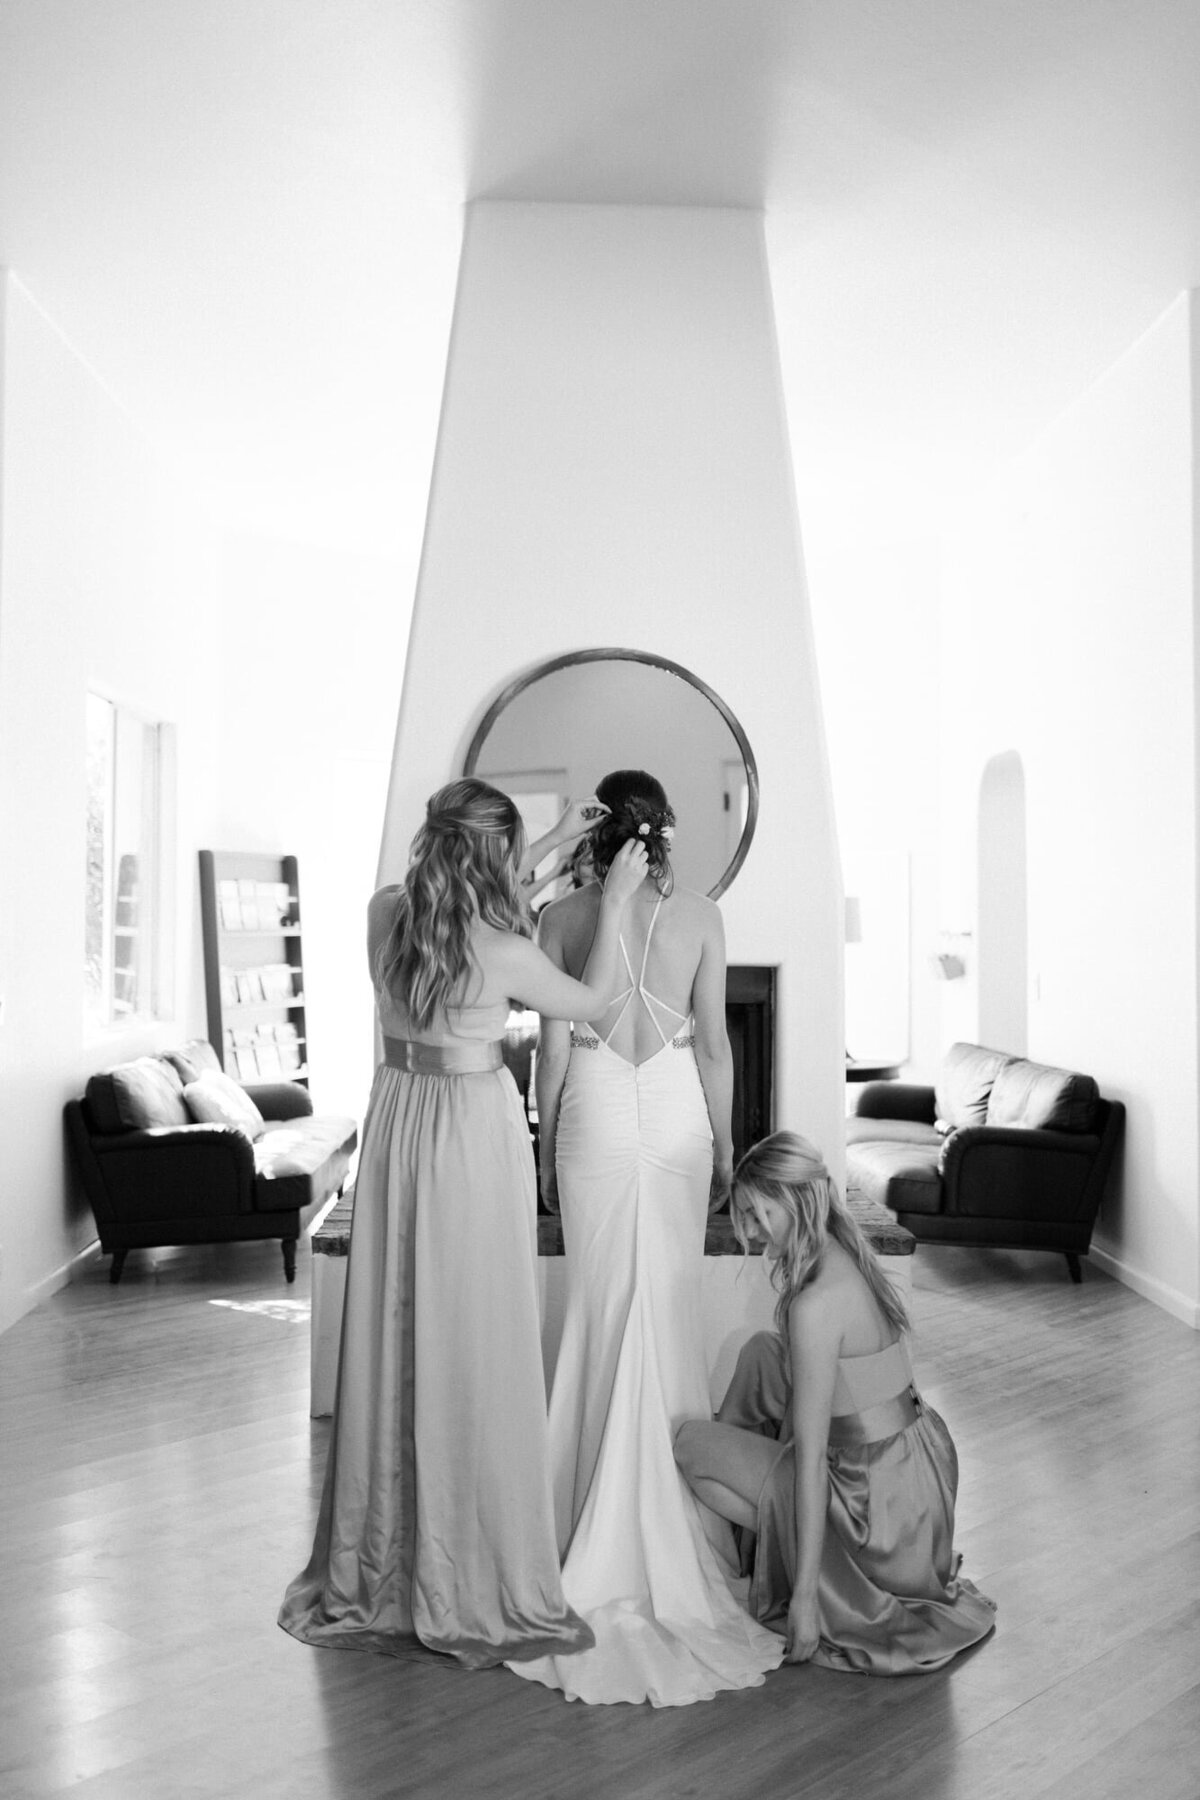 Bridesmaids assist Bride getting ready at private residence in Scottsdale